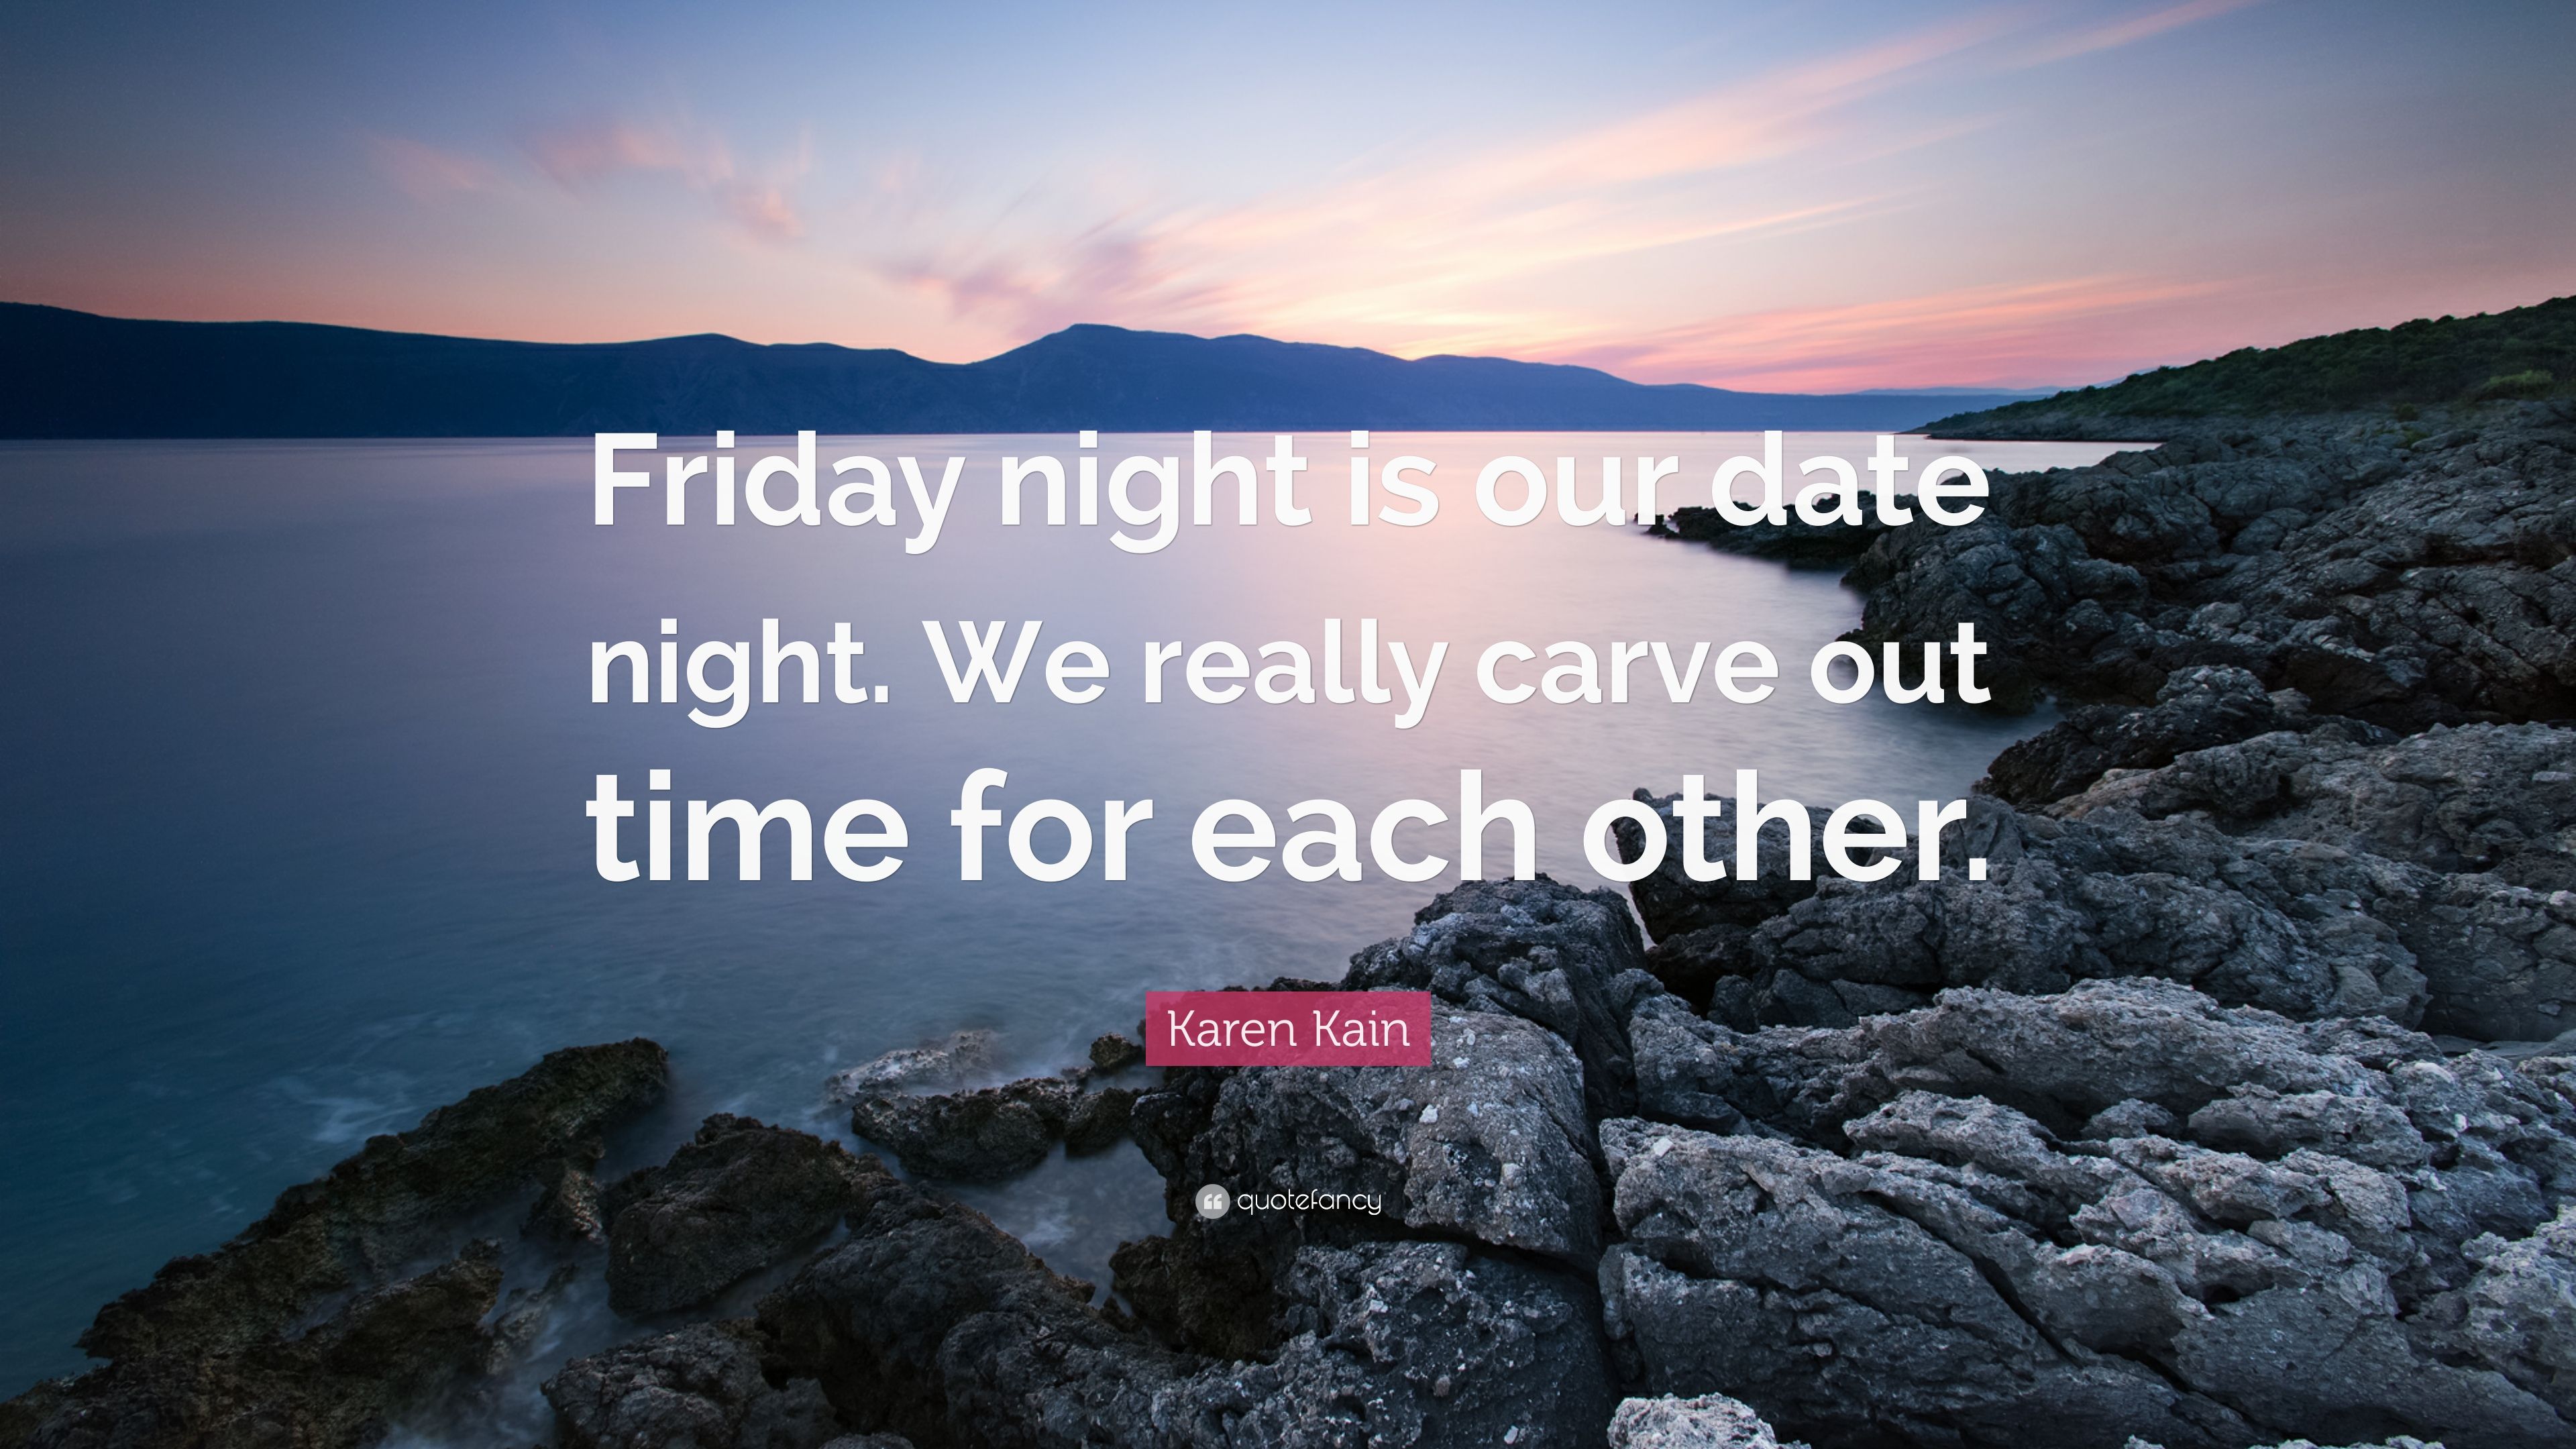 Karen Kain Quote: “Friday night is our date night. We really carve out time for each other.” (7 wallpaper)